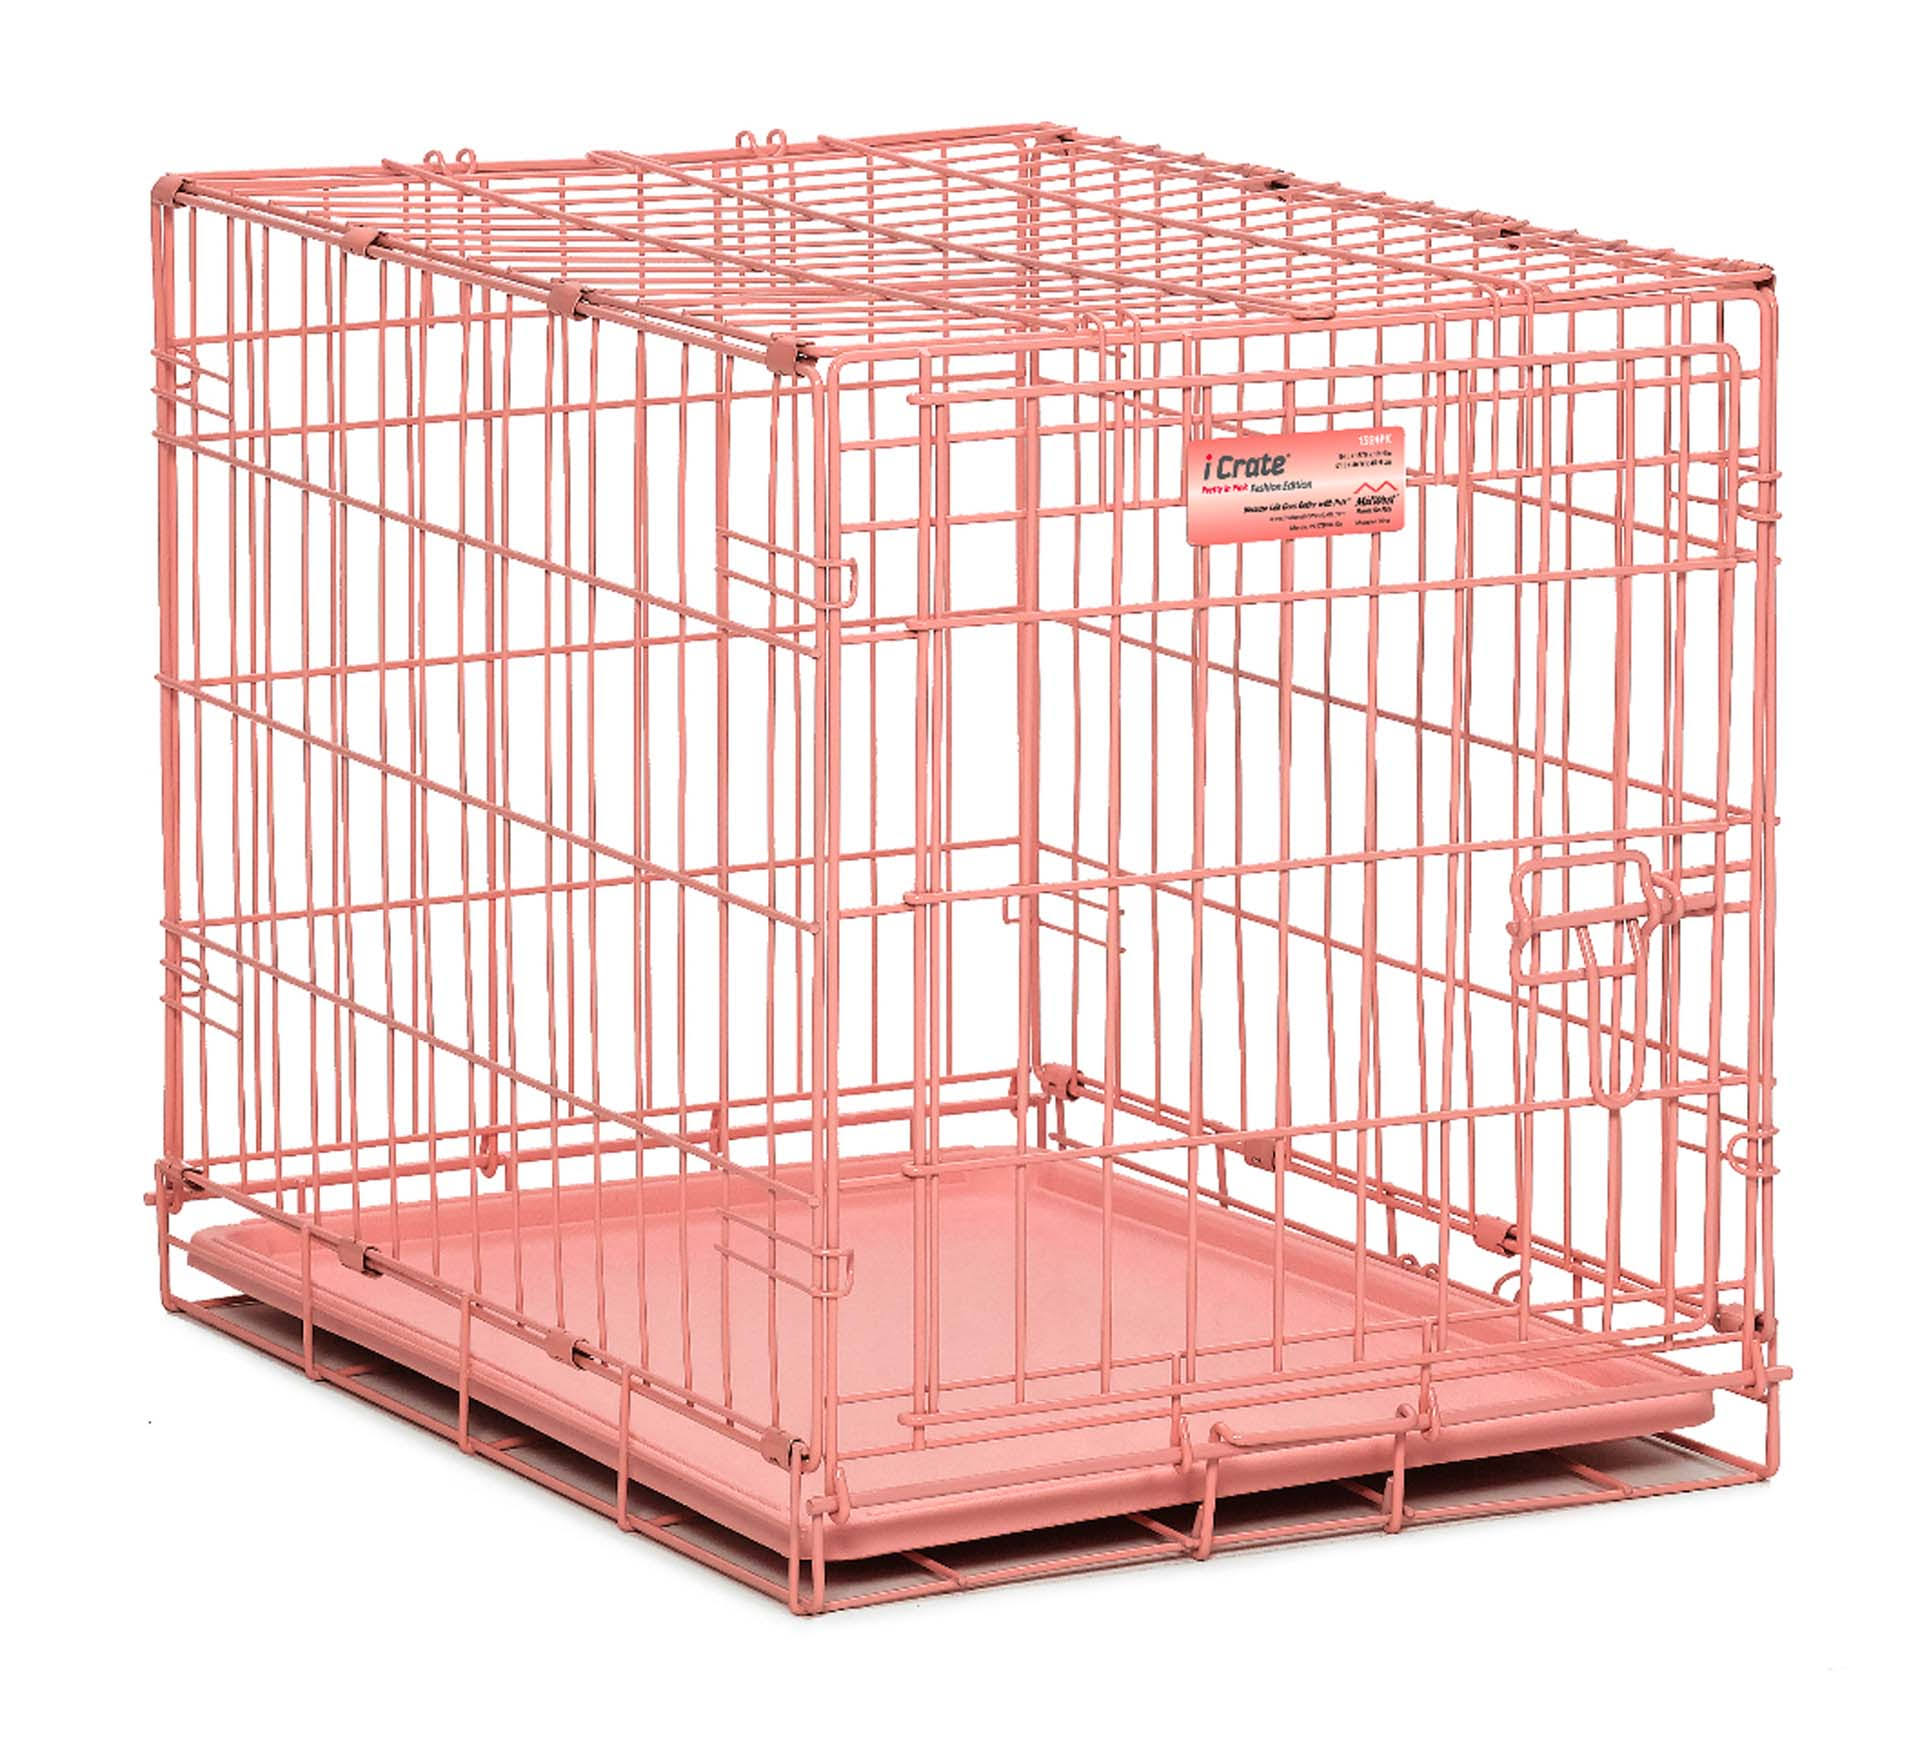 Midwest iCrate Single Door Pet Crates Portable Dog Crate - Pink, 24", Small